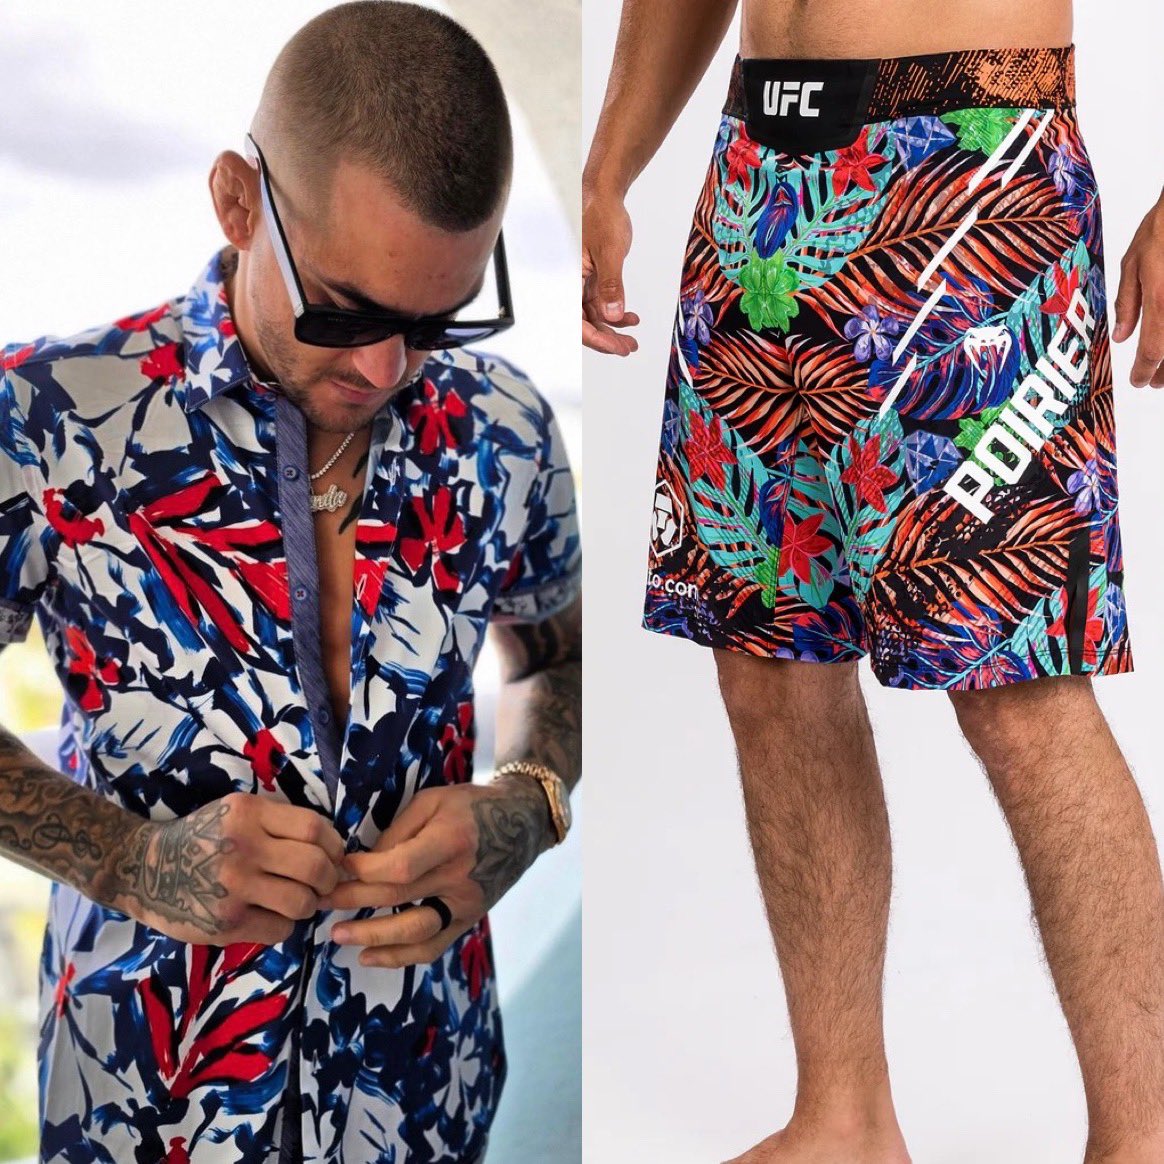 Dustin Poirier will be wearing custom made floral shorts by Venum at UFC 302 👀 

Floral shorts have a 100% KO rate in the UFC, Max Holloway as an example😂h/t @DieHardMMAPod